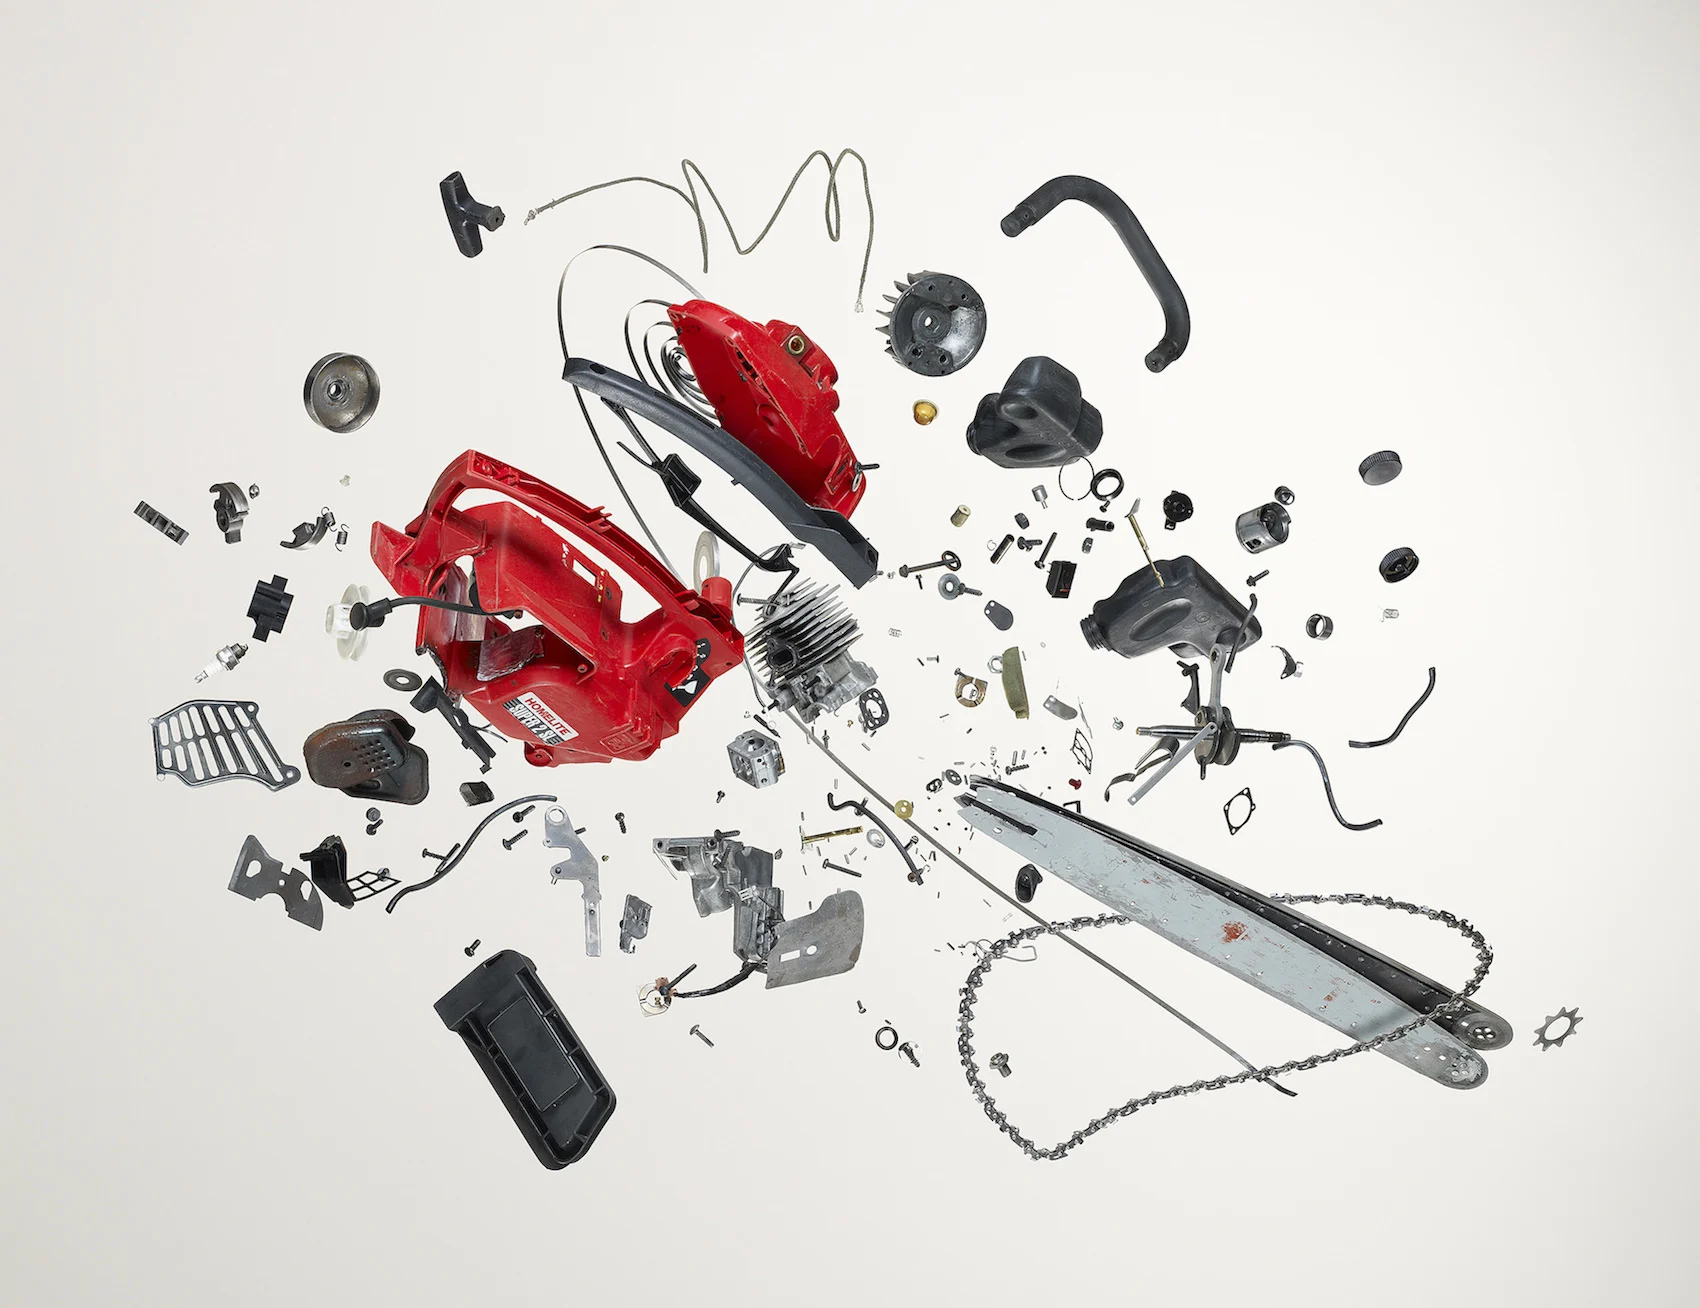 Todd McLellan's Striking Photography Deconstructs Everyday Objects